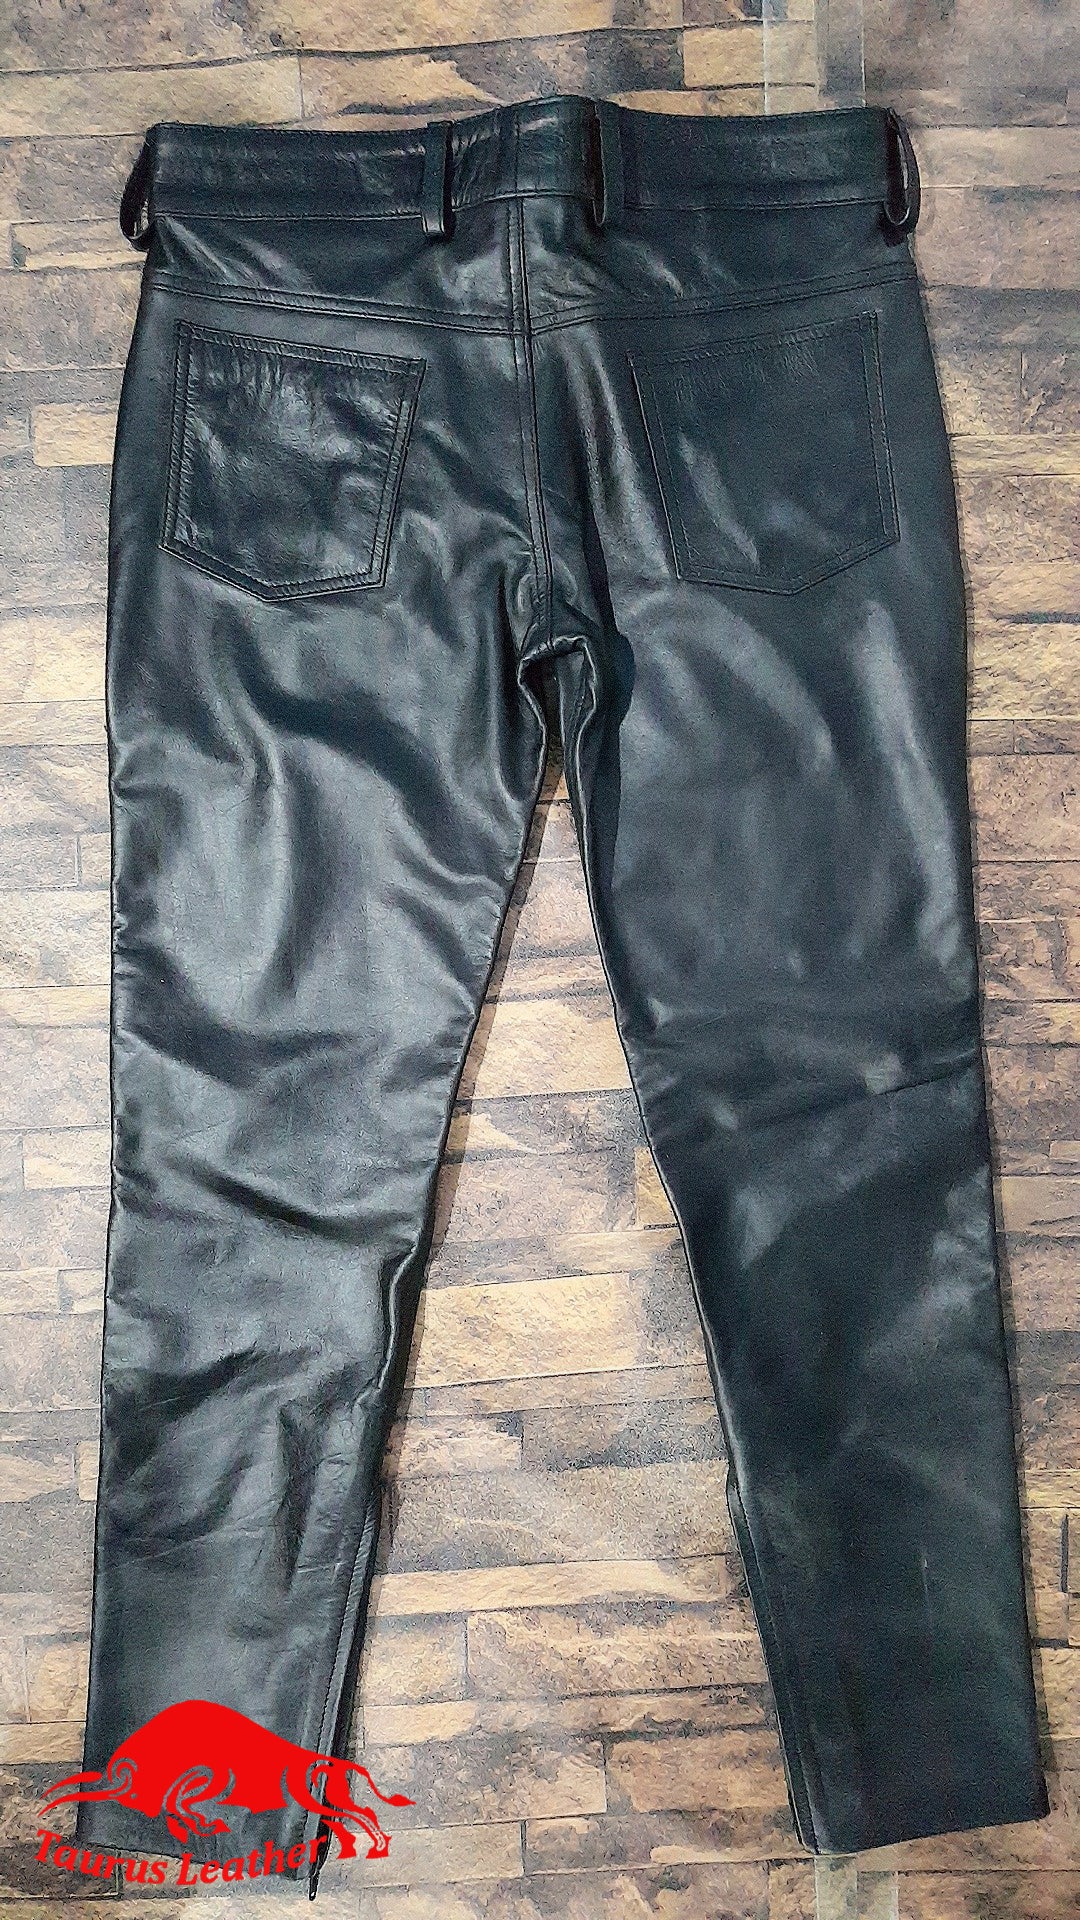 TAURUS LEATHER 501 Cow Leather Black Pant